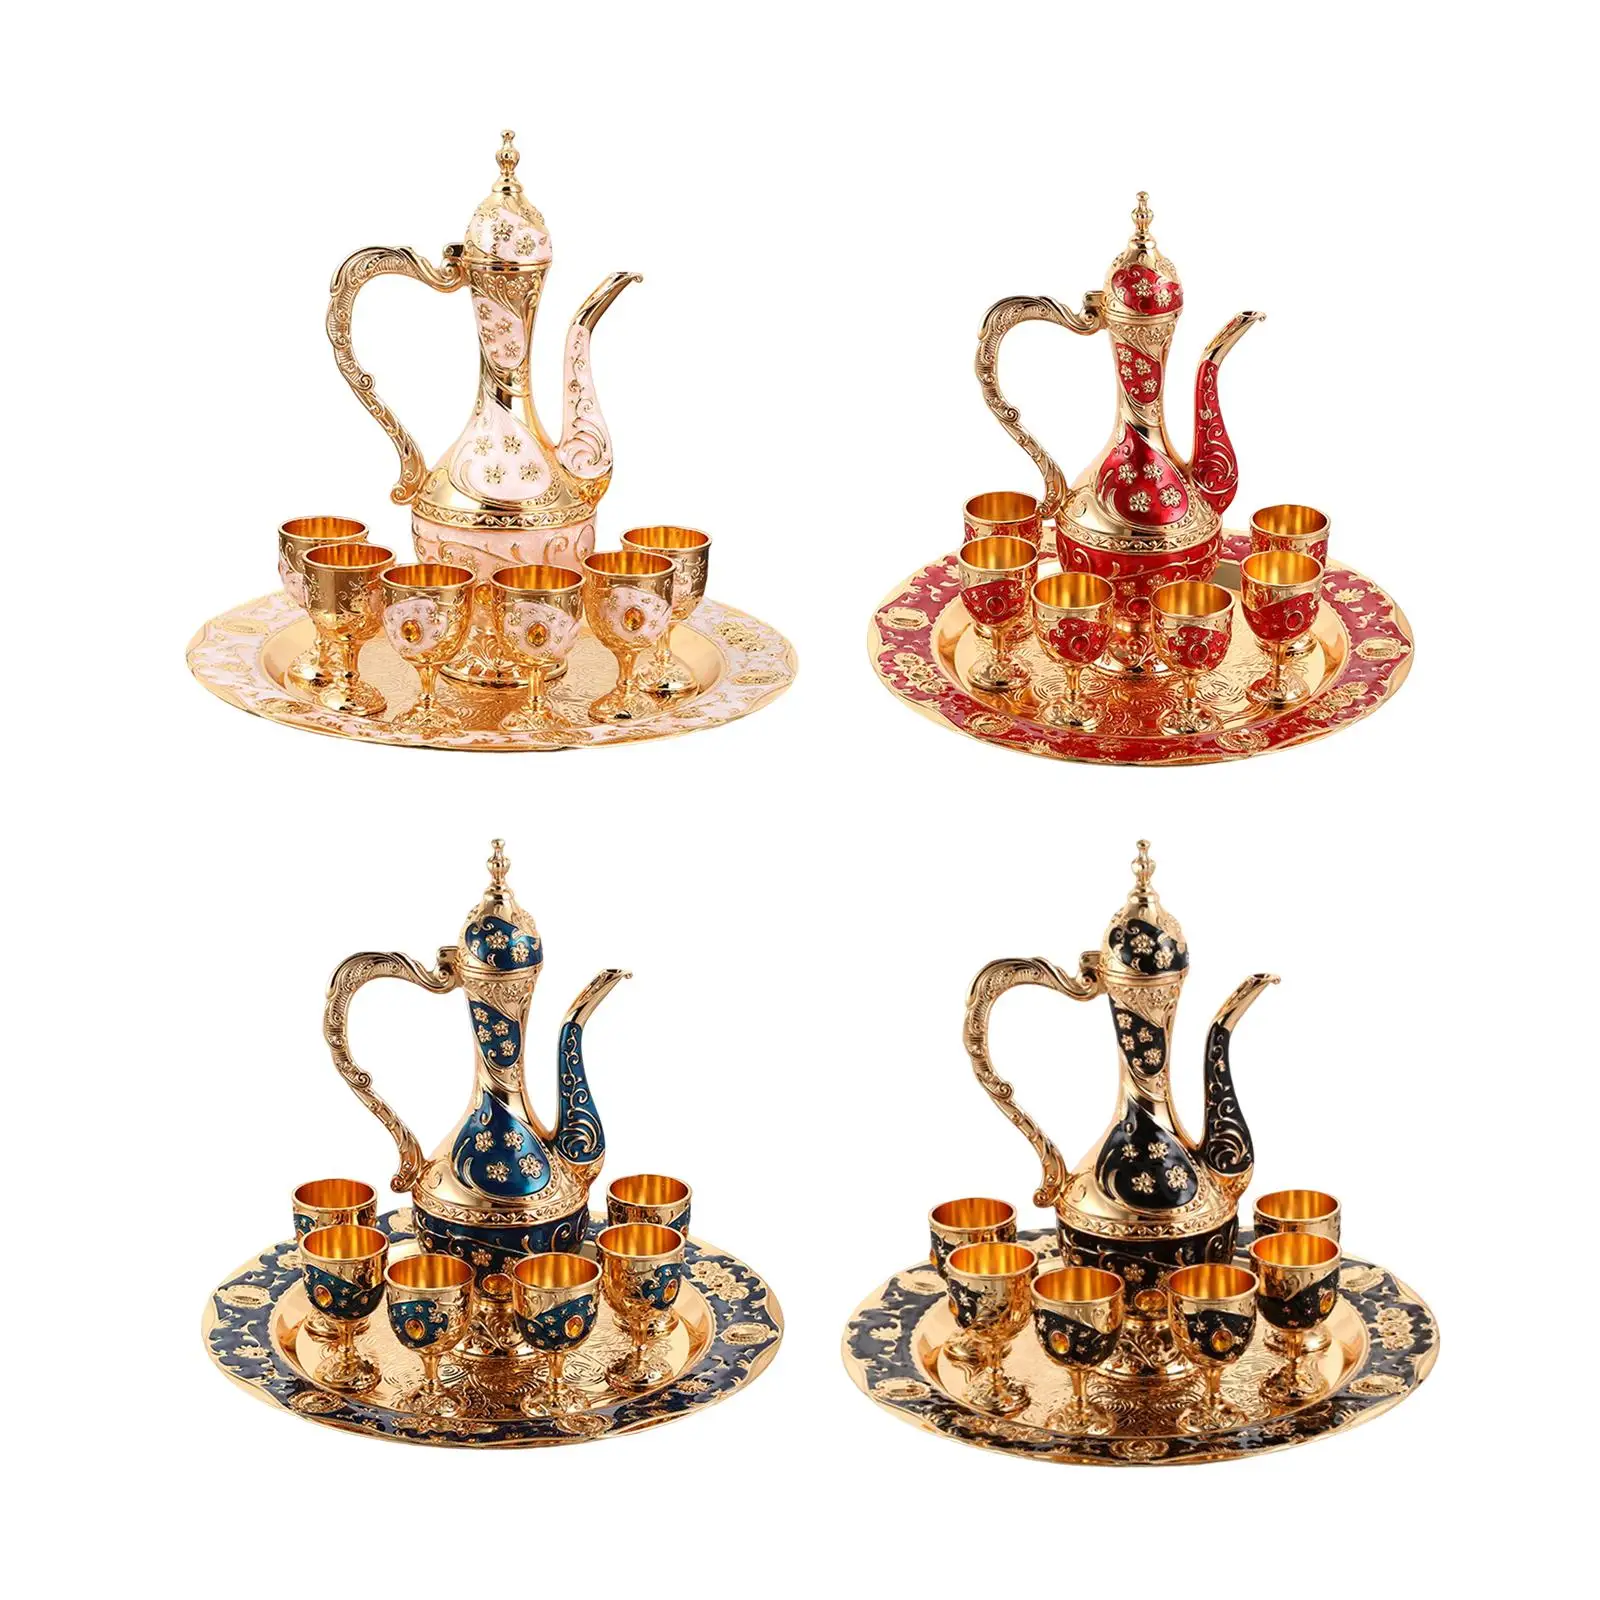 

Luxury Turkish Coffee Pot Set with Drinking Cups Tea Serving Set Beverage Serveware for Holiday Home Living Room Bedroom Decor